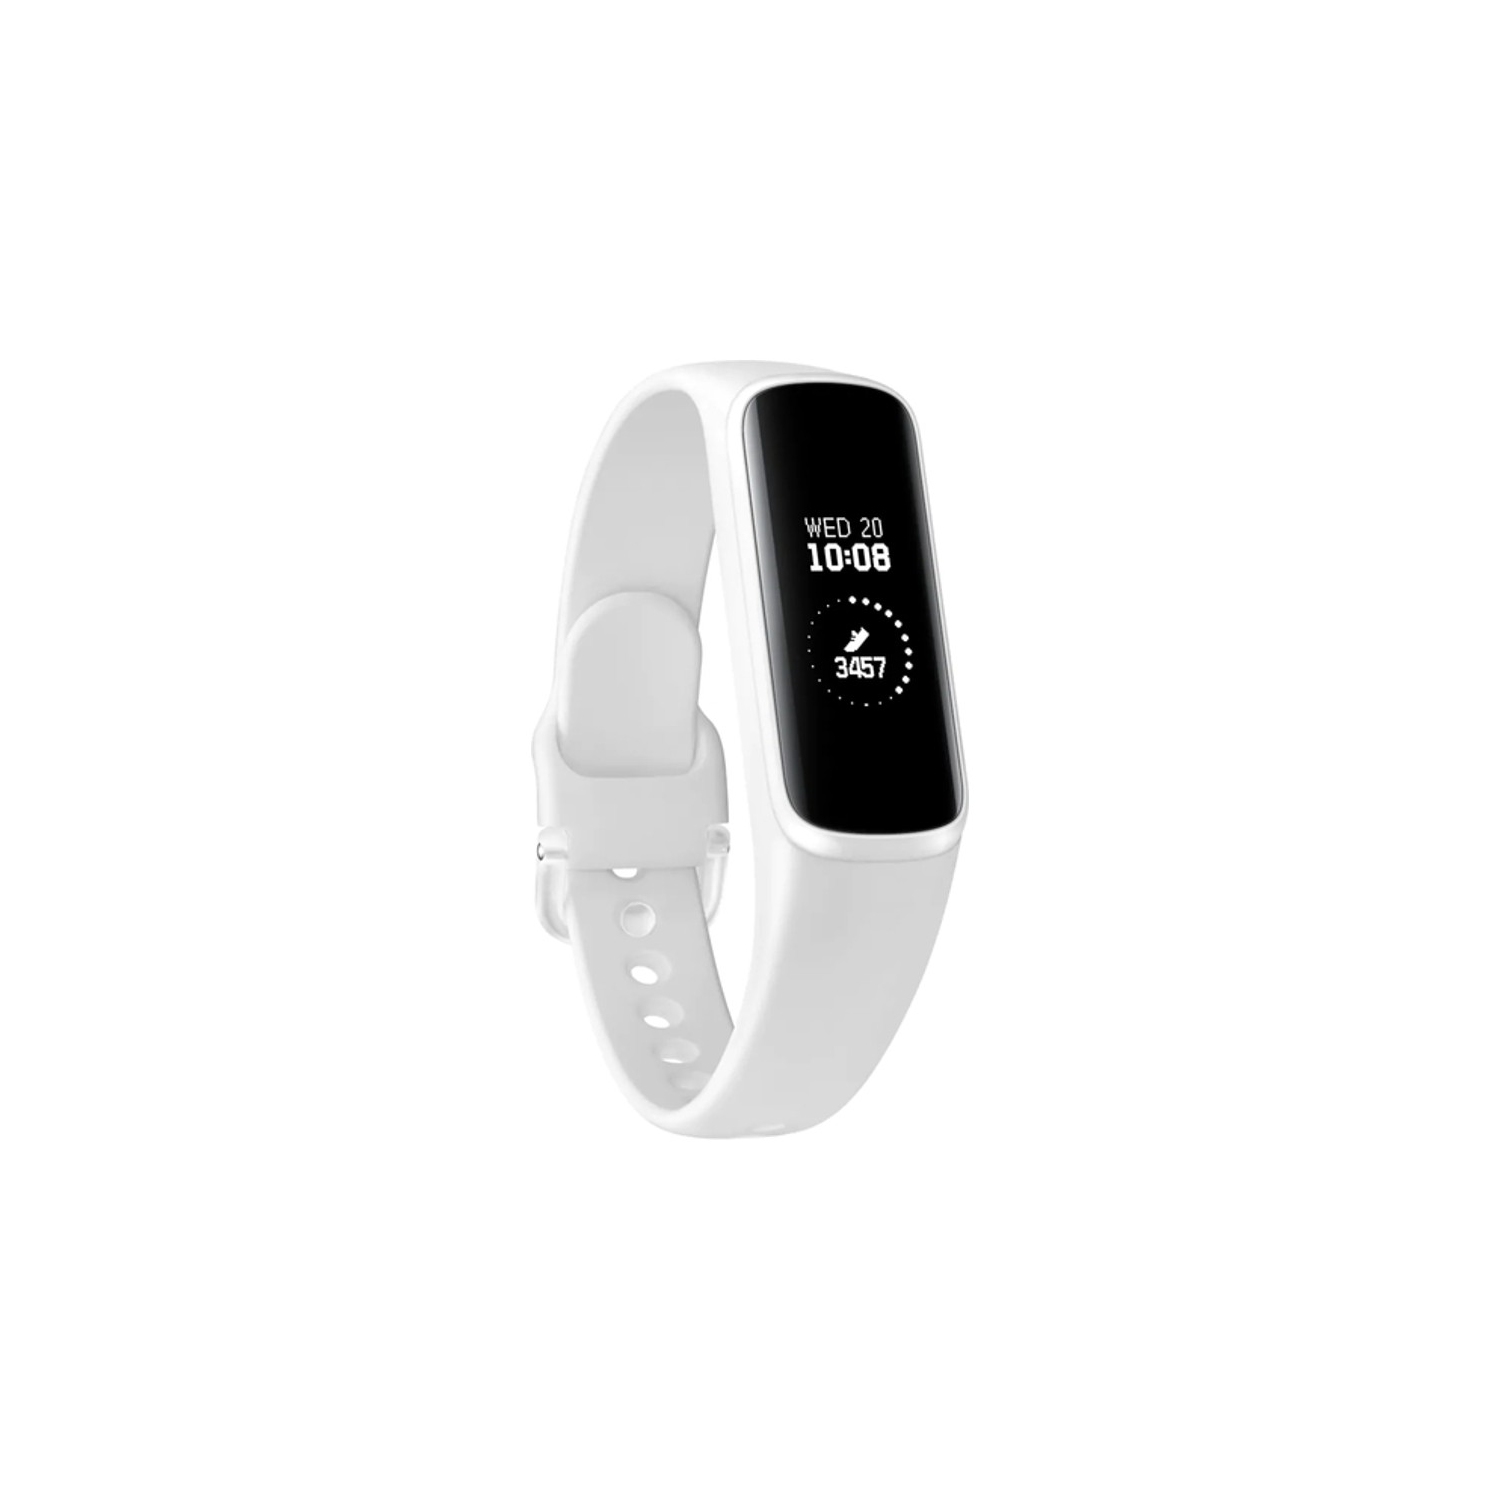 Refurbished (Excellent) - Samsung Galaxy Fit E Fitness Band - Heart Rate & Sleep Tracker - White - Certified Refurbished